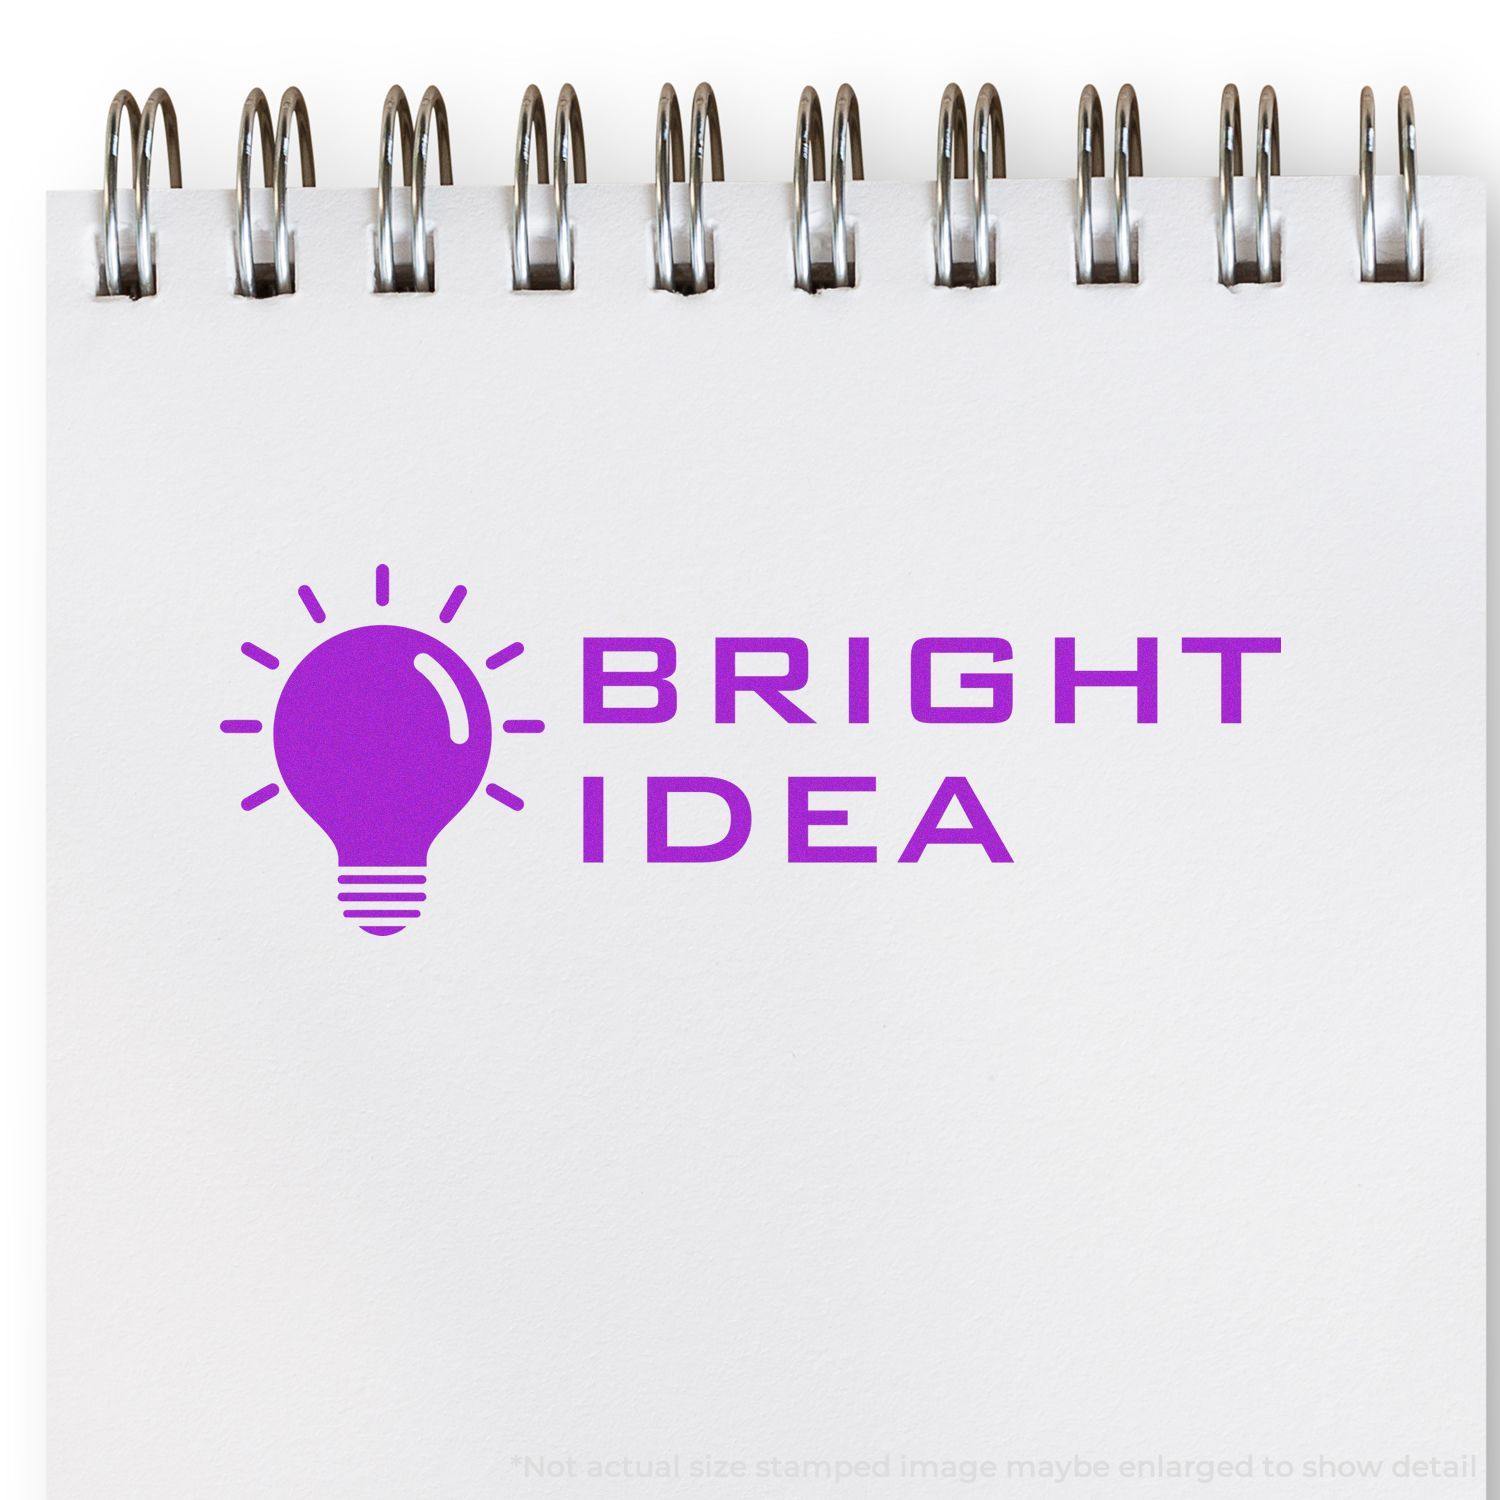 A self-inking stamp with a stamped image showing how the text "BRIGHT IDEA" (in a tech-style font with an image of a bright lightbulb on the left side) is displayed after stamping.